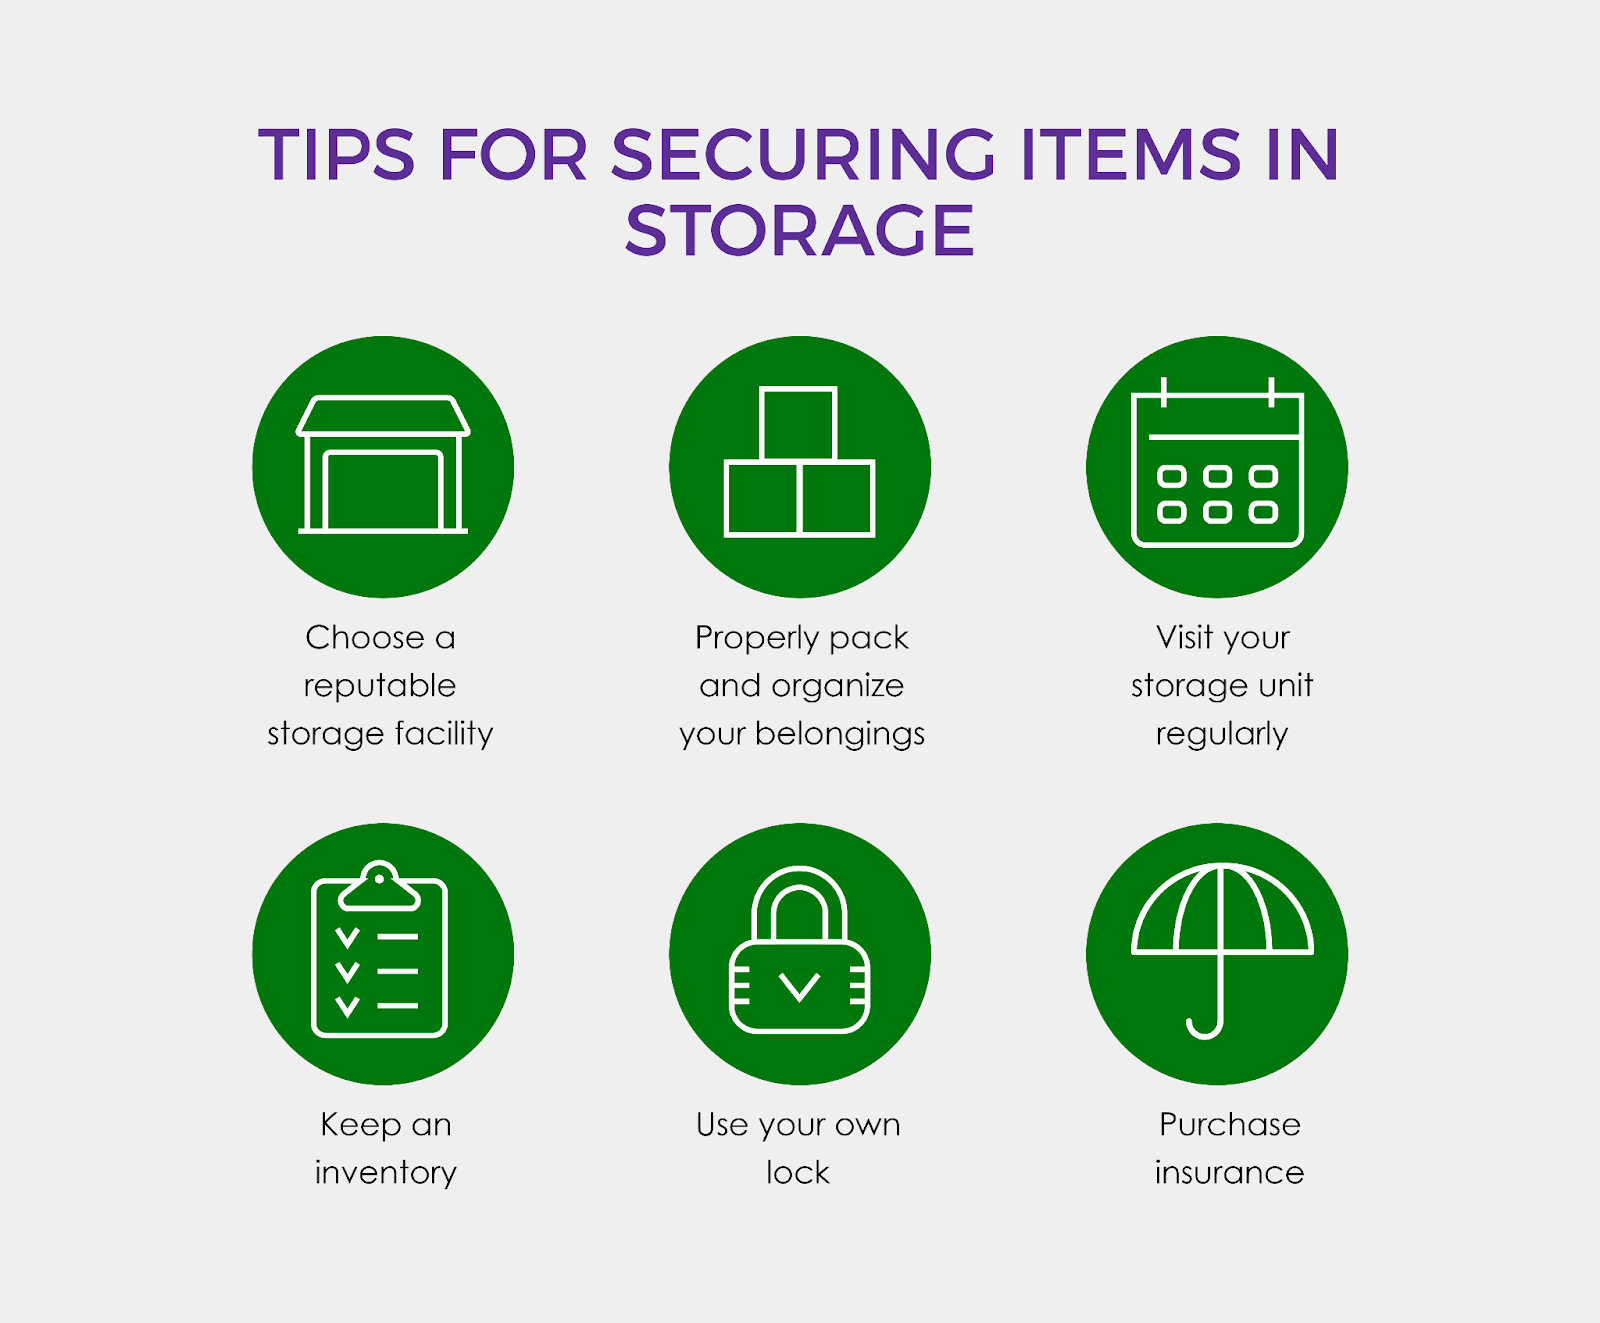 Tips for securing items in storage